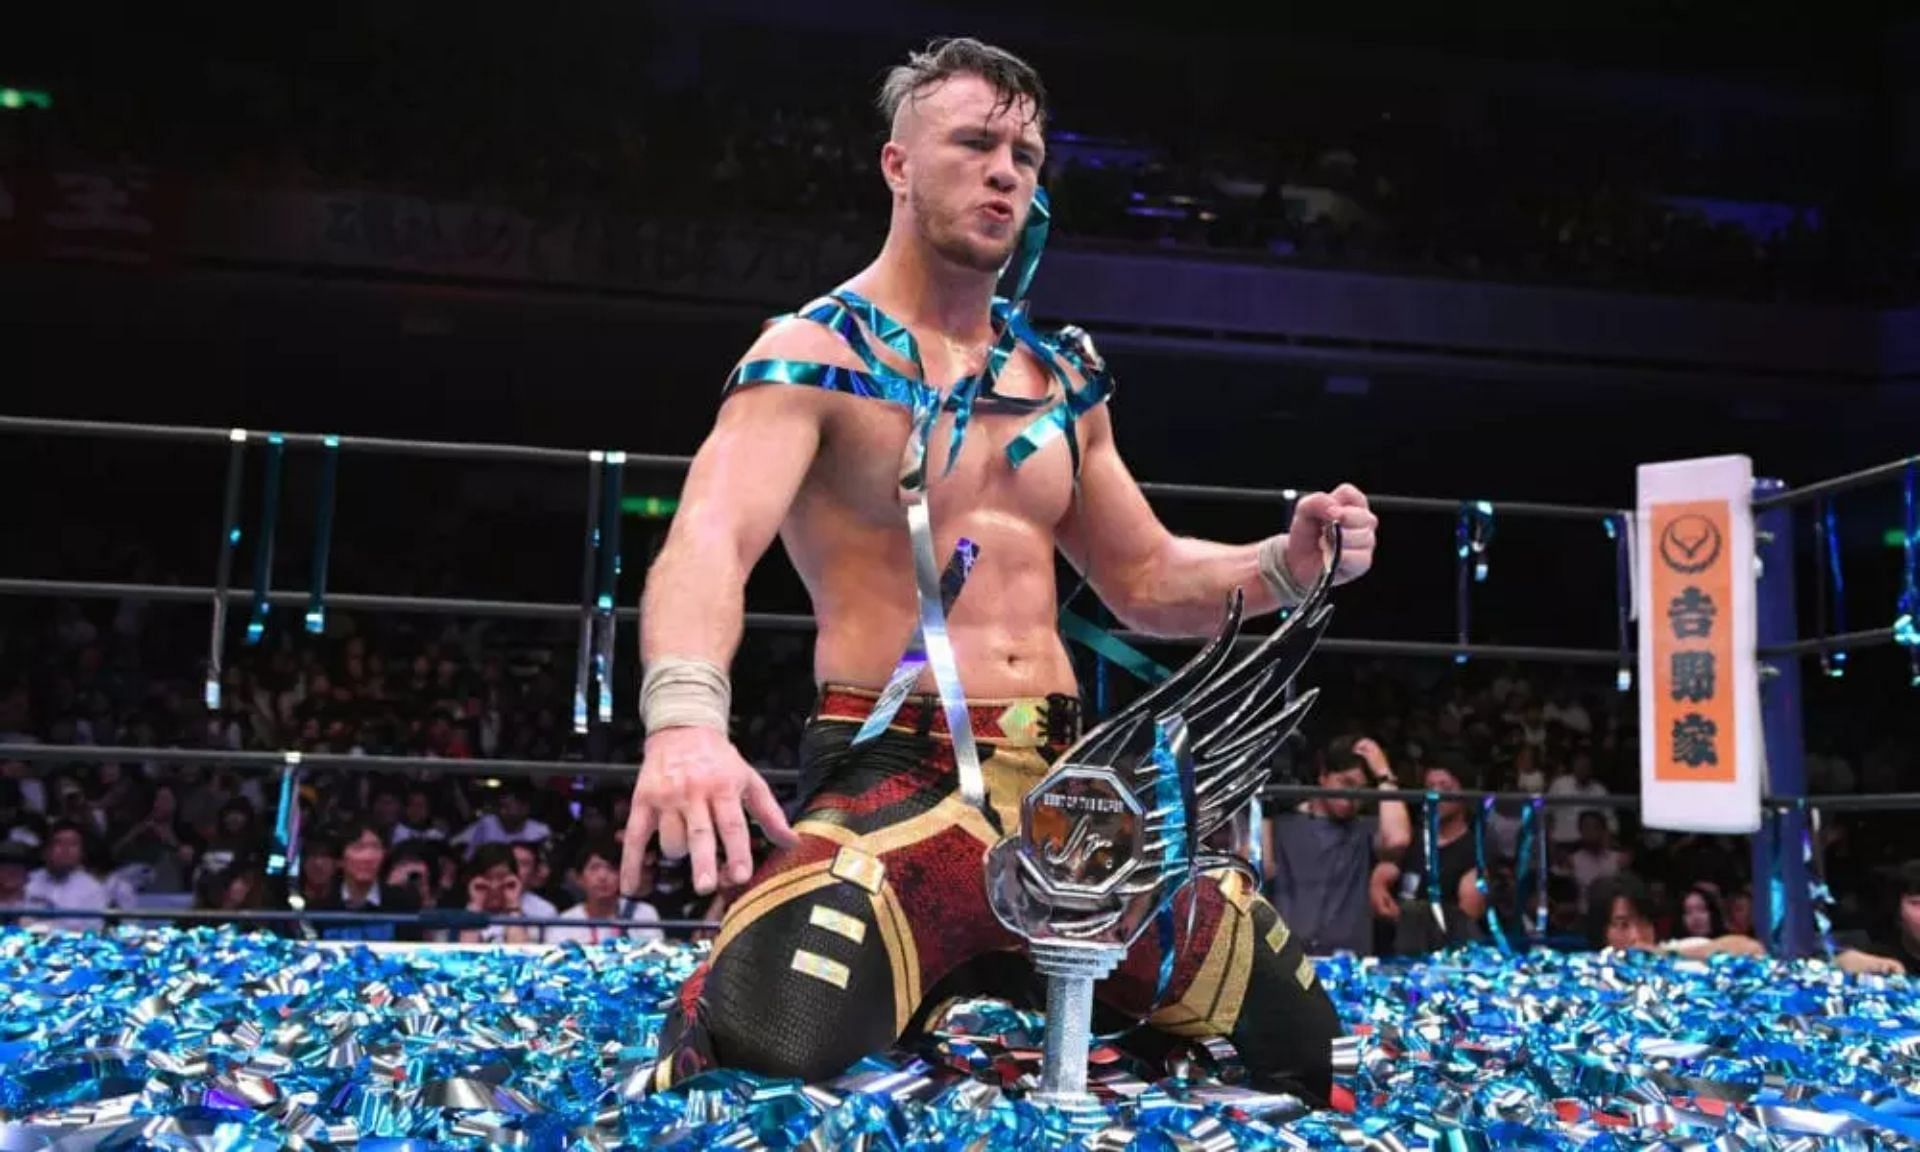 Will Ospreay is a former IWGP Heavyweight Champion